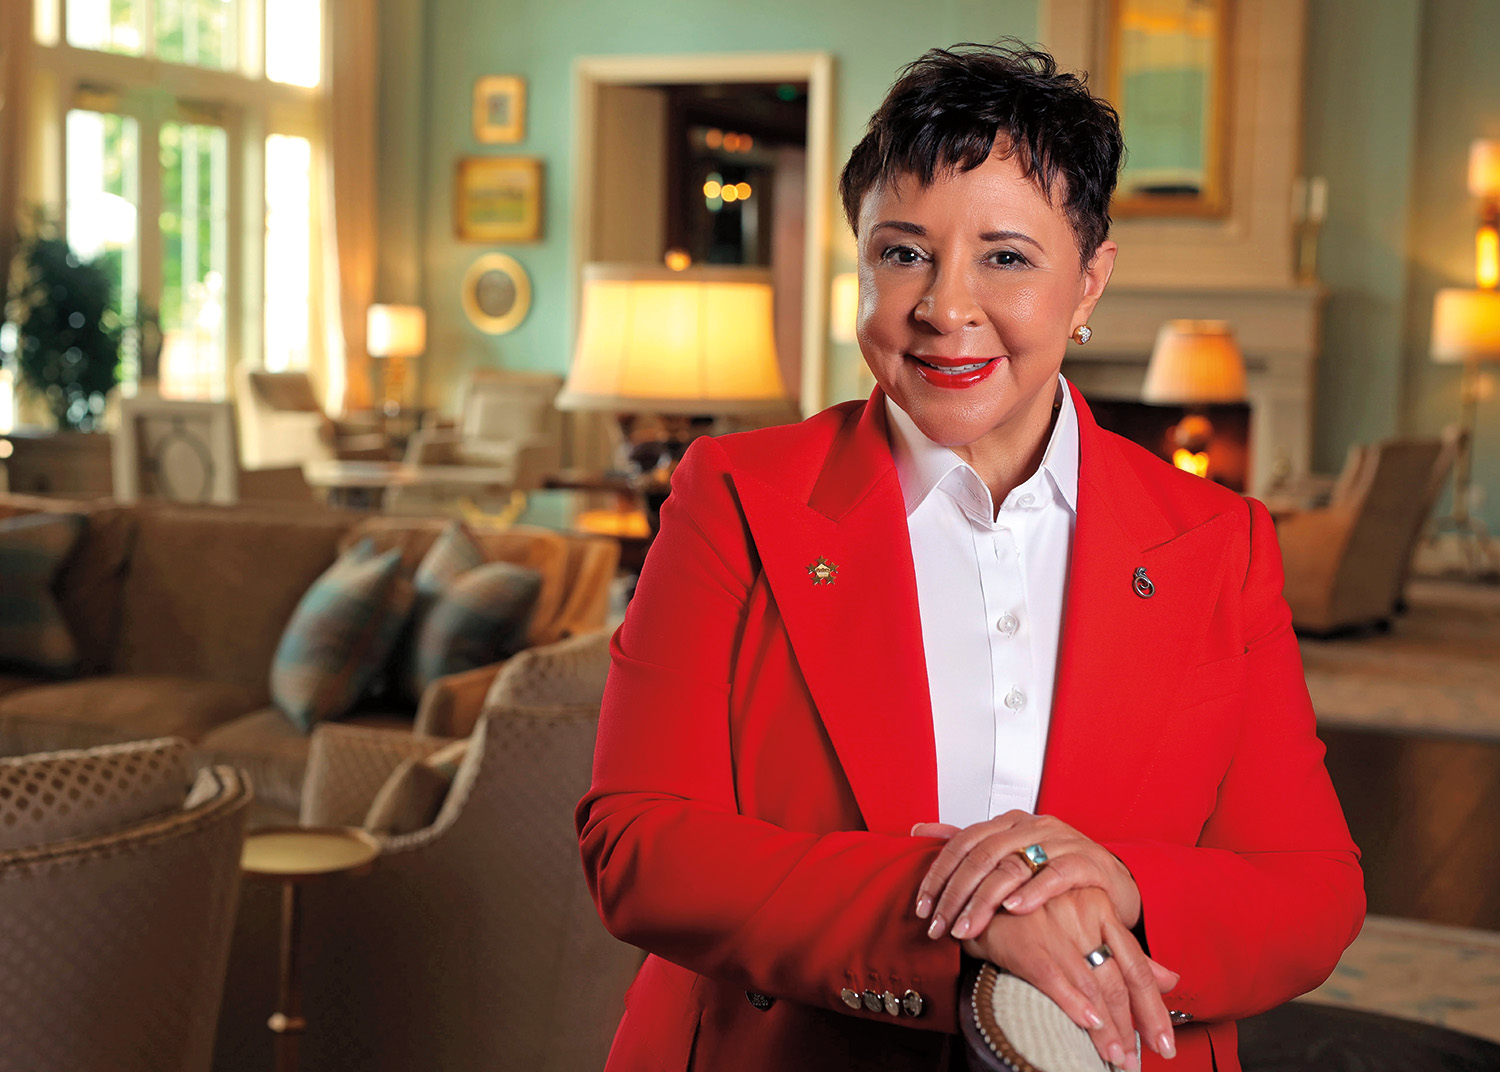 A headshot of Sheila Johnson. She faces the camera and smiles. She has light brown skin and short black hair. She wears earrings with diamonds and gold, a white collared shirt, and a red suit jacket with pins on the lapels.